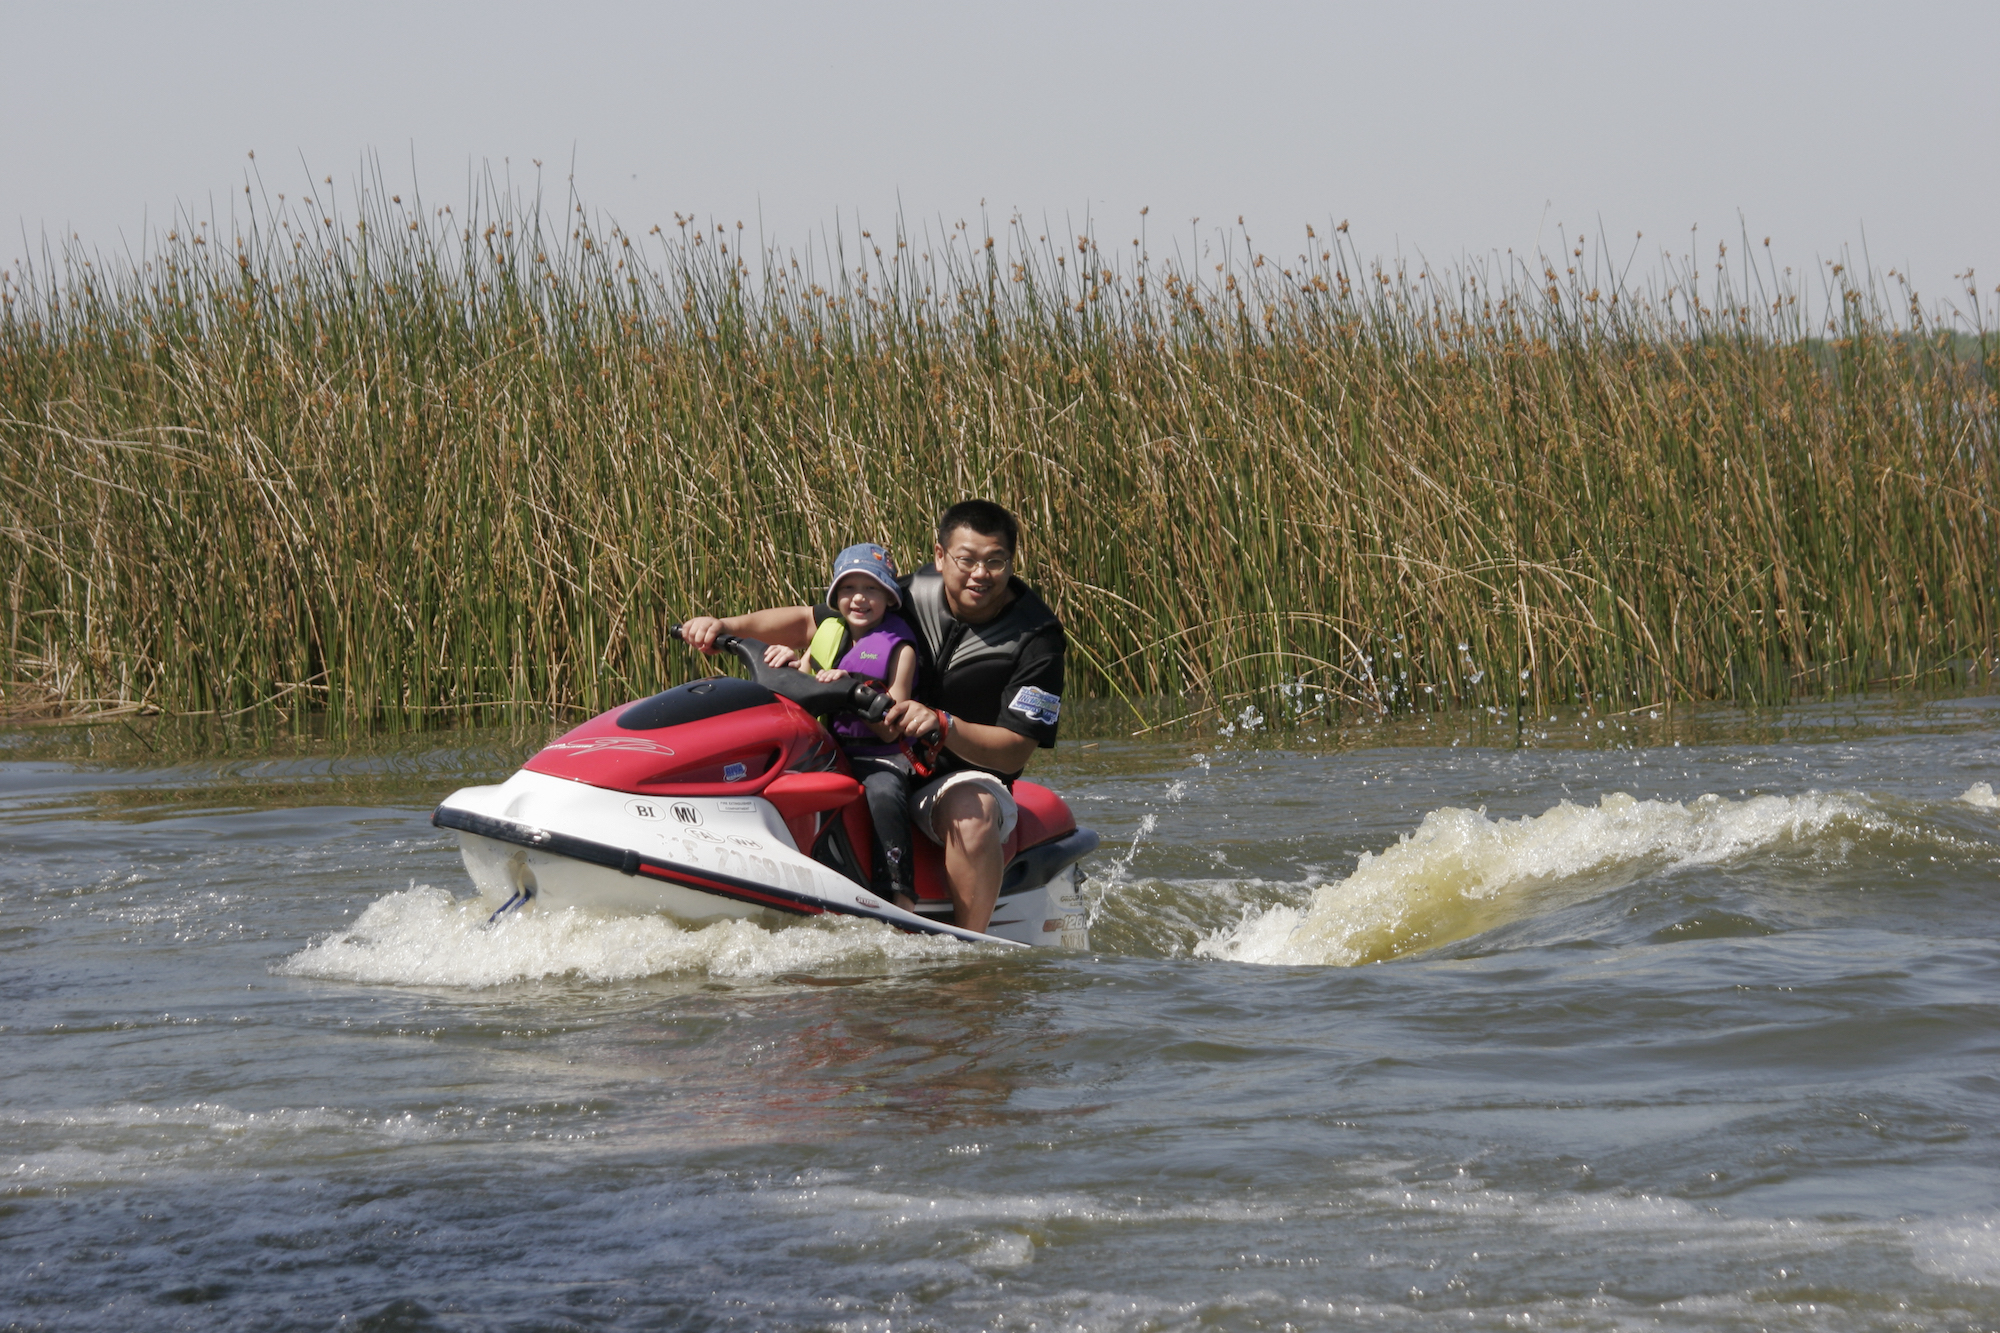 A man and a child ride a WaveRunner on Lake Parker in Lakeland, Florida